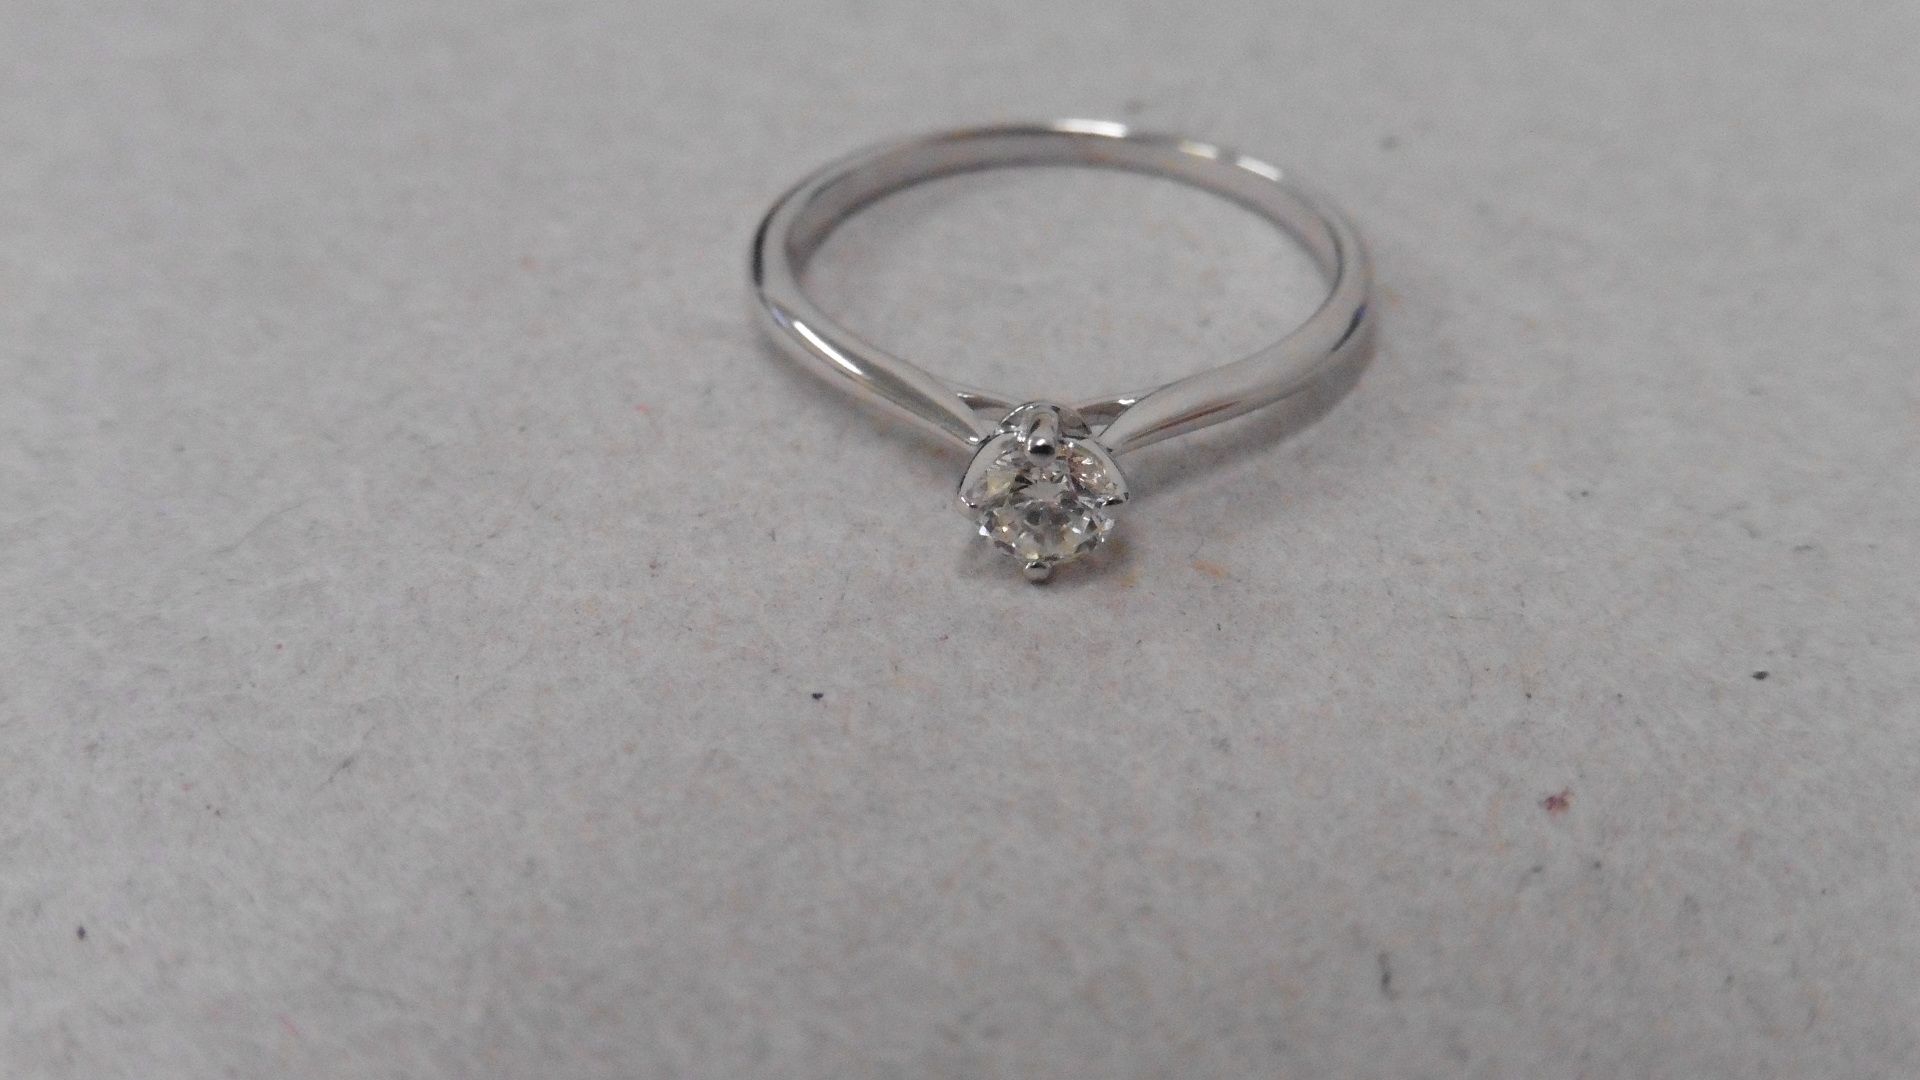 0.20ct diamond solitaire ring. Brilliant cut diamond. H/I colour and si2 clarity. 4 claw setting - Image 2 of 4